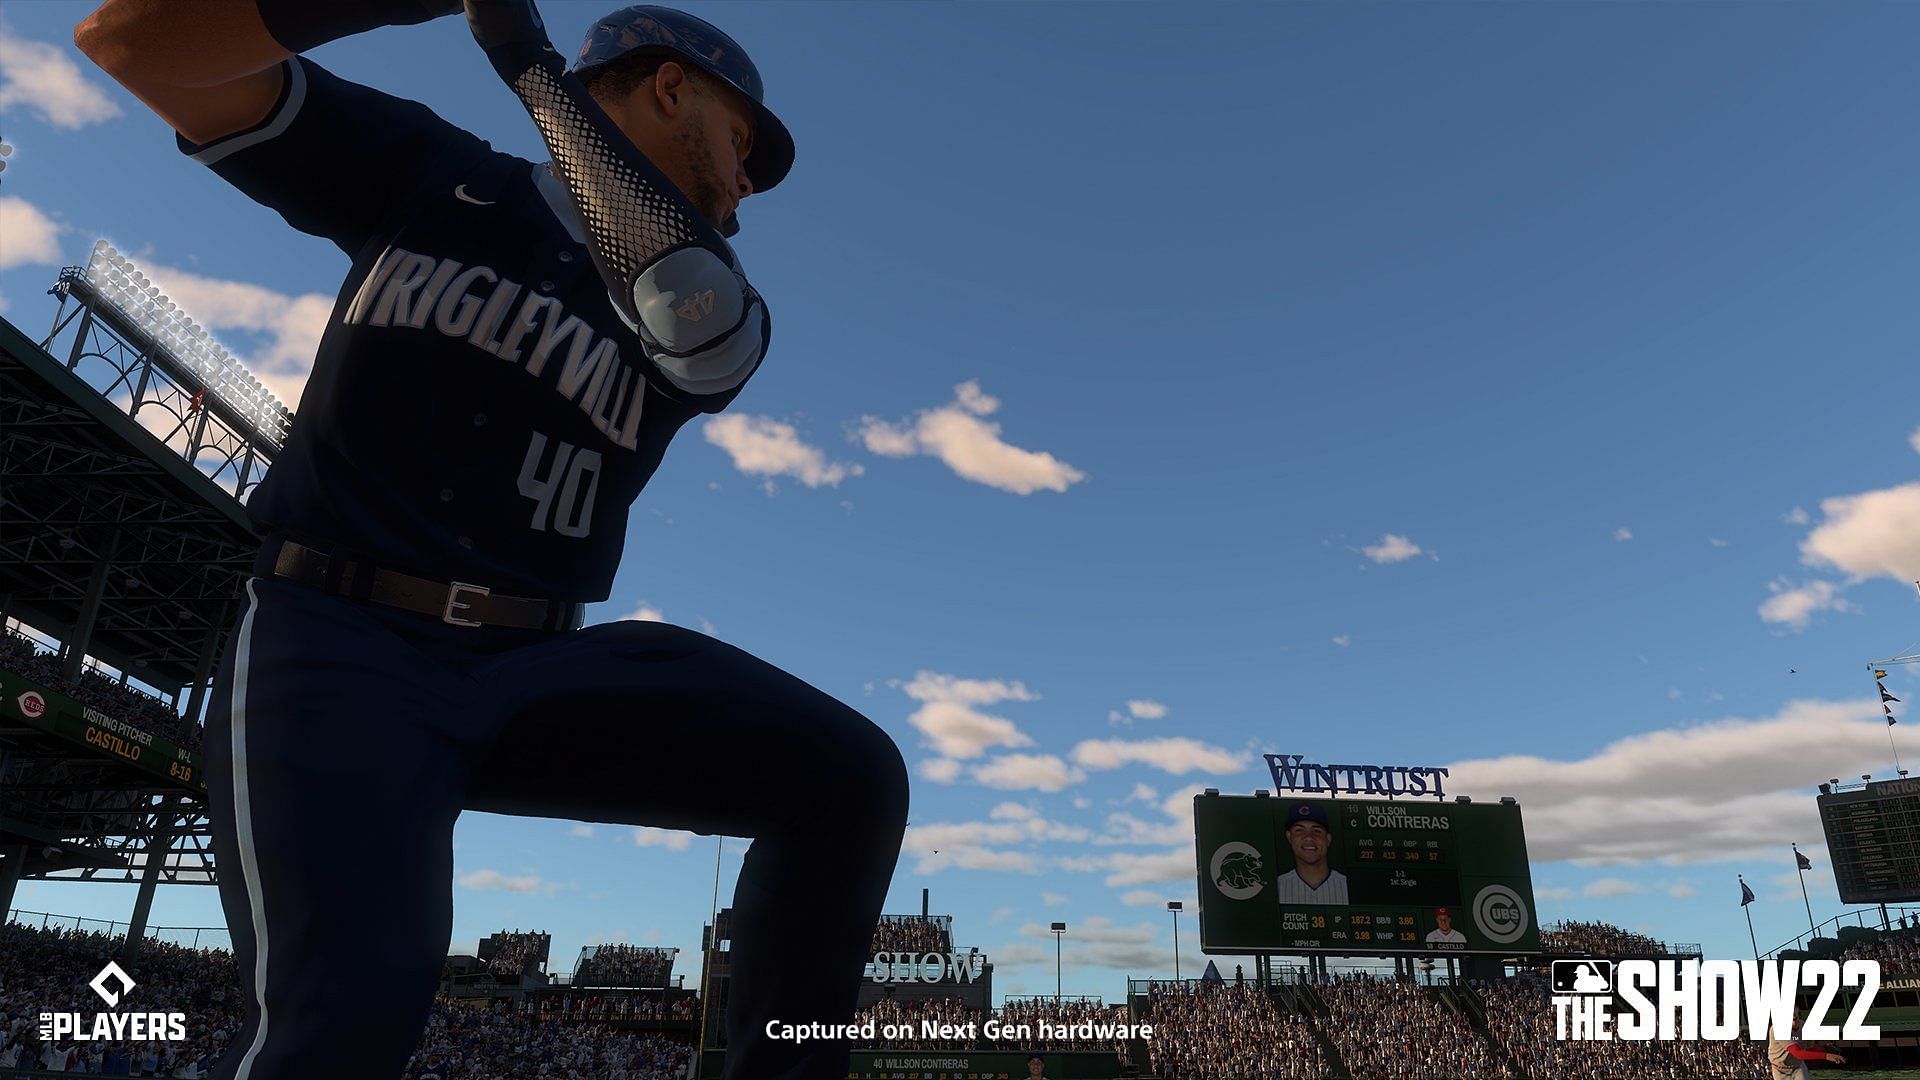 Wilson Contreras in The Show (Image via MLB The Show Twitter page)